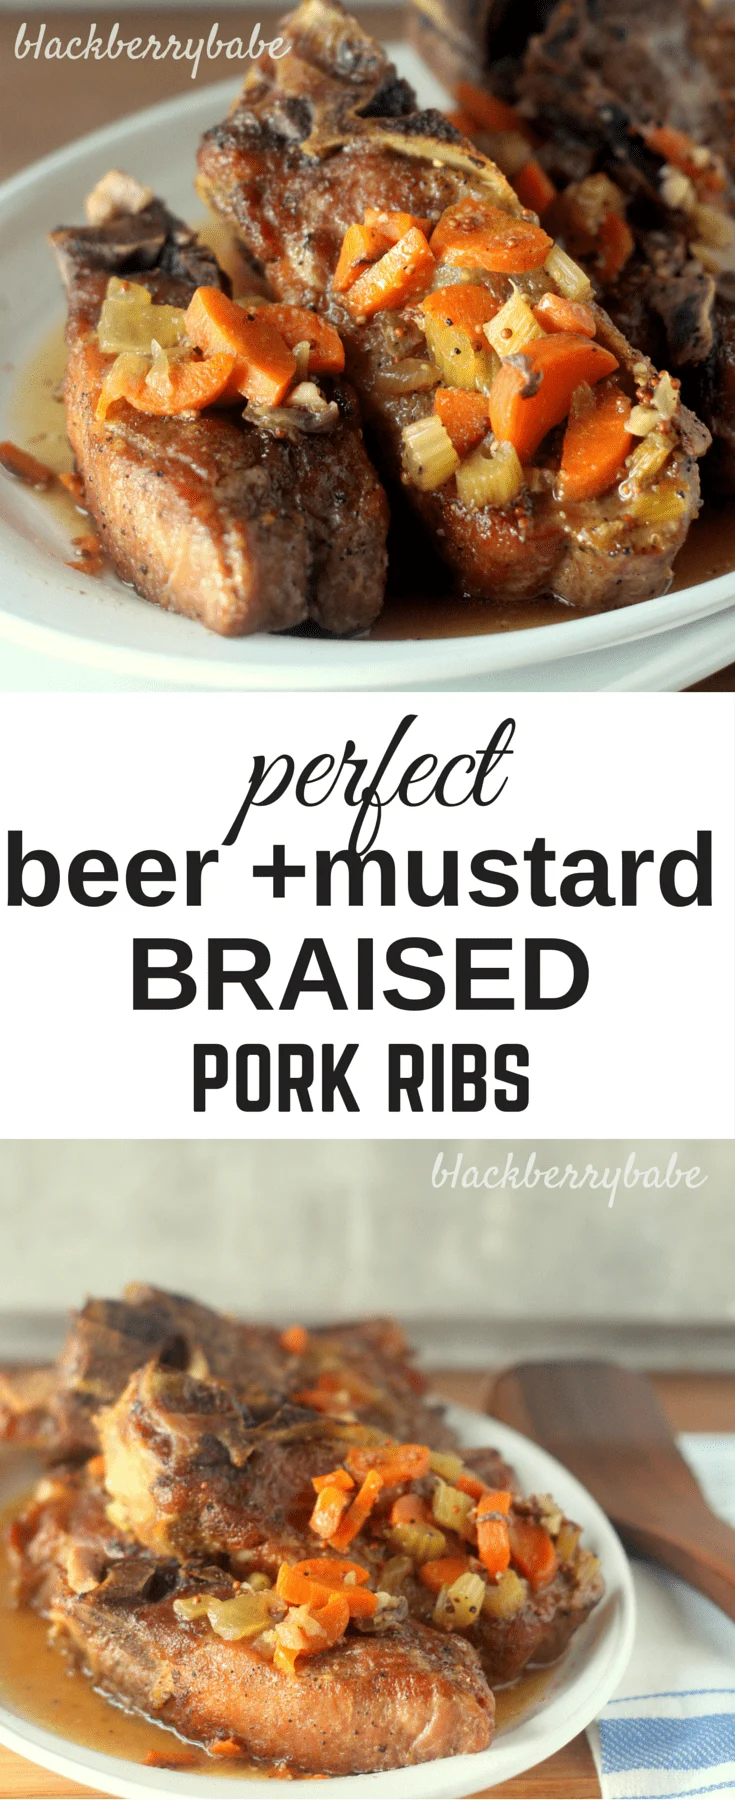 Perfectly braised pork ribs in a savory beer and mustard sauce! So easy and inexpensive, uses country-style pork ribs.